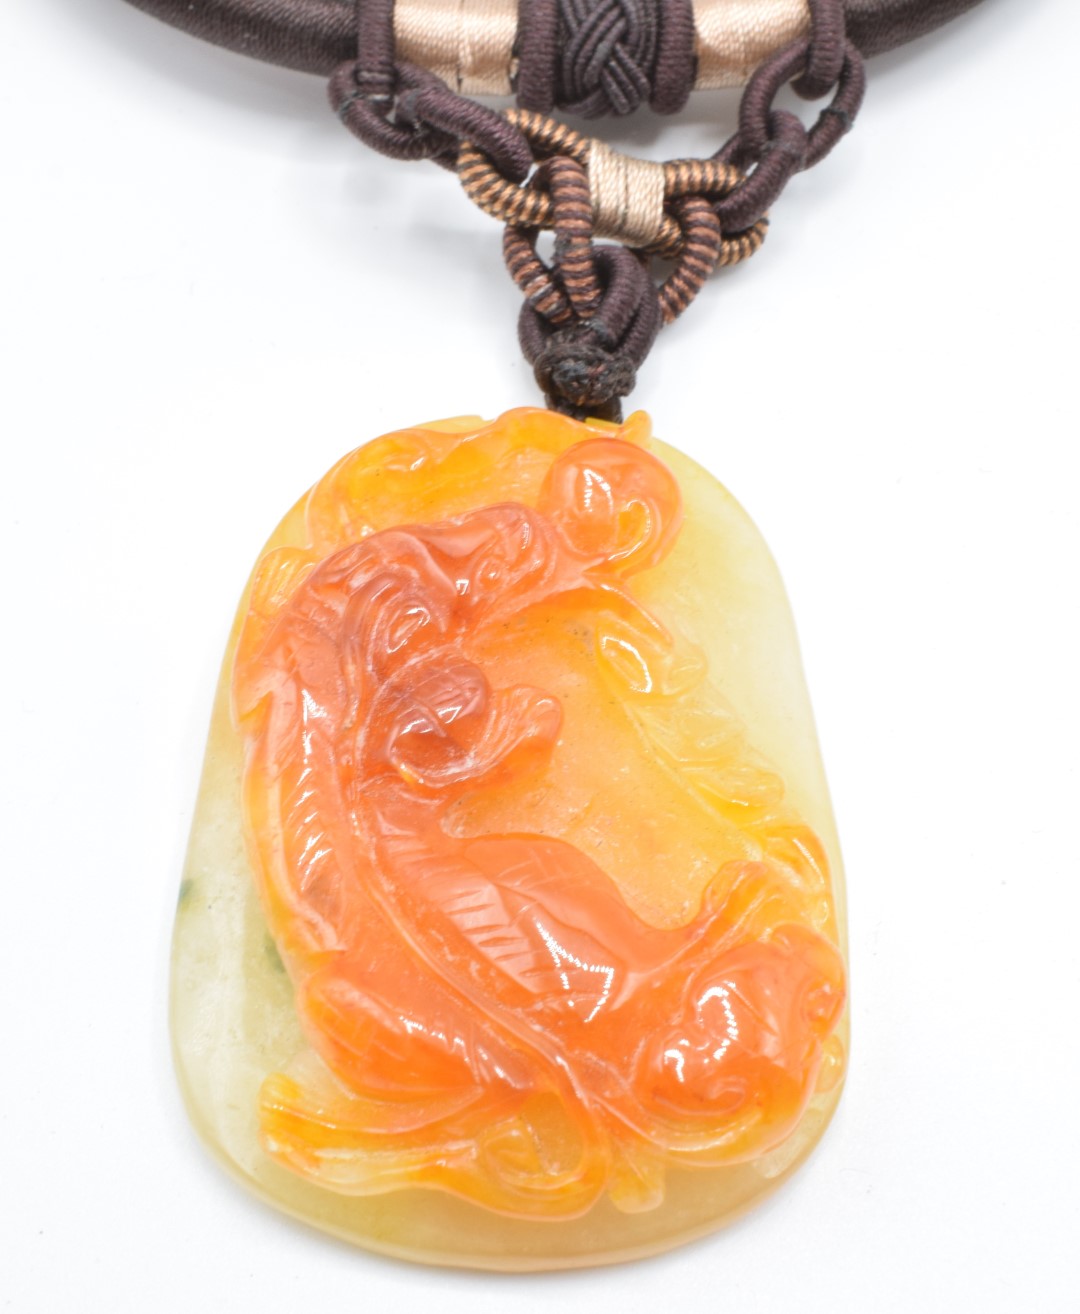 Two Chinese orange jade pendants, one depicting a creature (5.5 x 3.8cm) and the other peaches, 4.